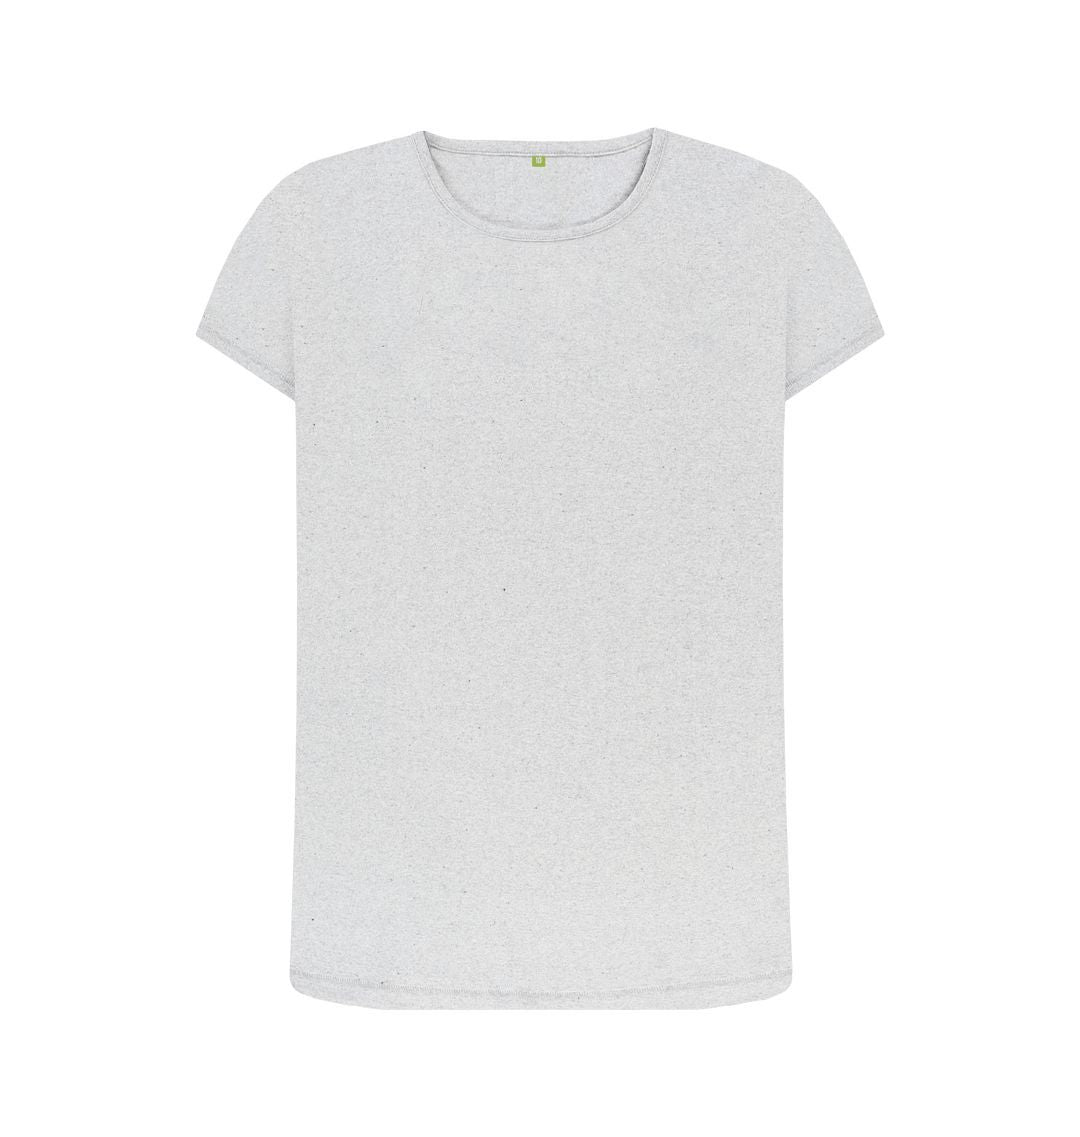 Grey Women's sustainable essential t-shirt